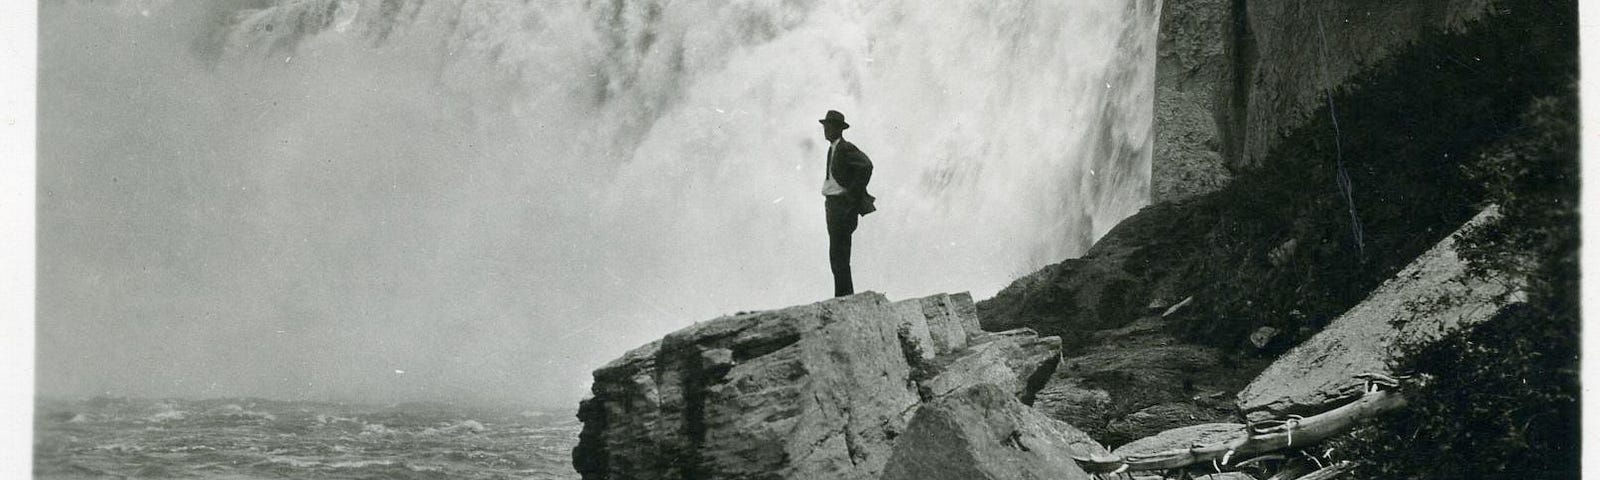 Vintage black-and-white photo of a person standing in front of waterfall.